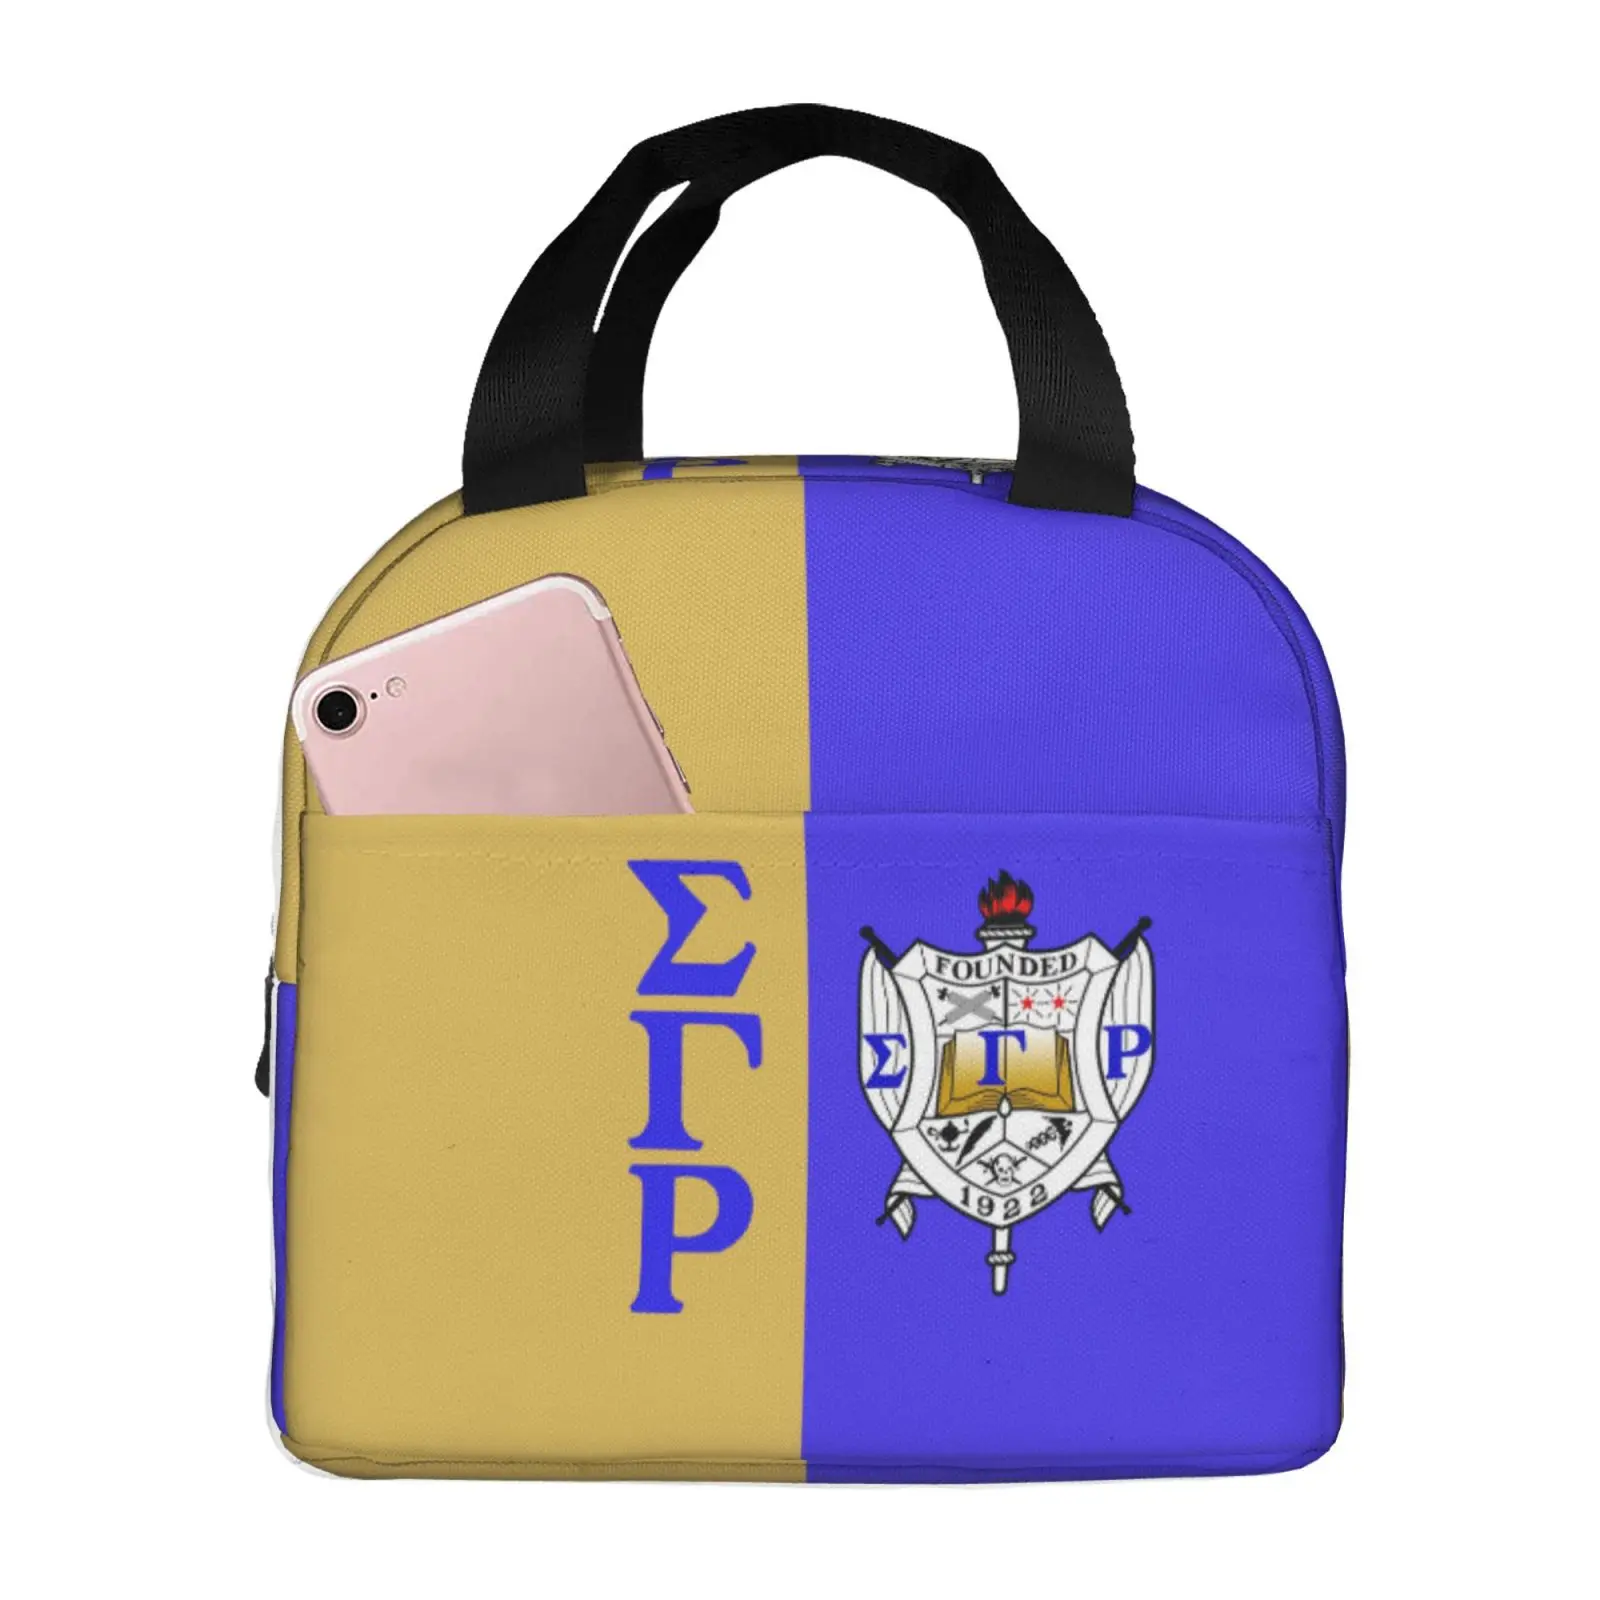 

Cmxljwyt Sigma Gamma Rho Lunch Bag Tote Meal Bag Reusable Insulated Portable Game Lunch Box Handbags for Work School Picnic